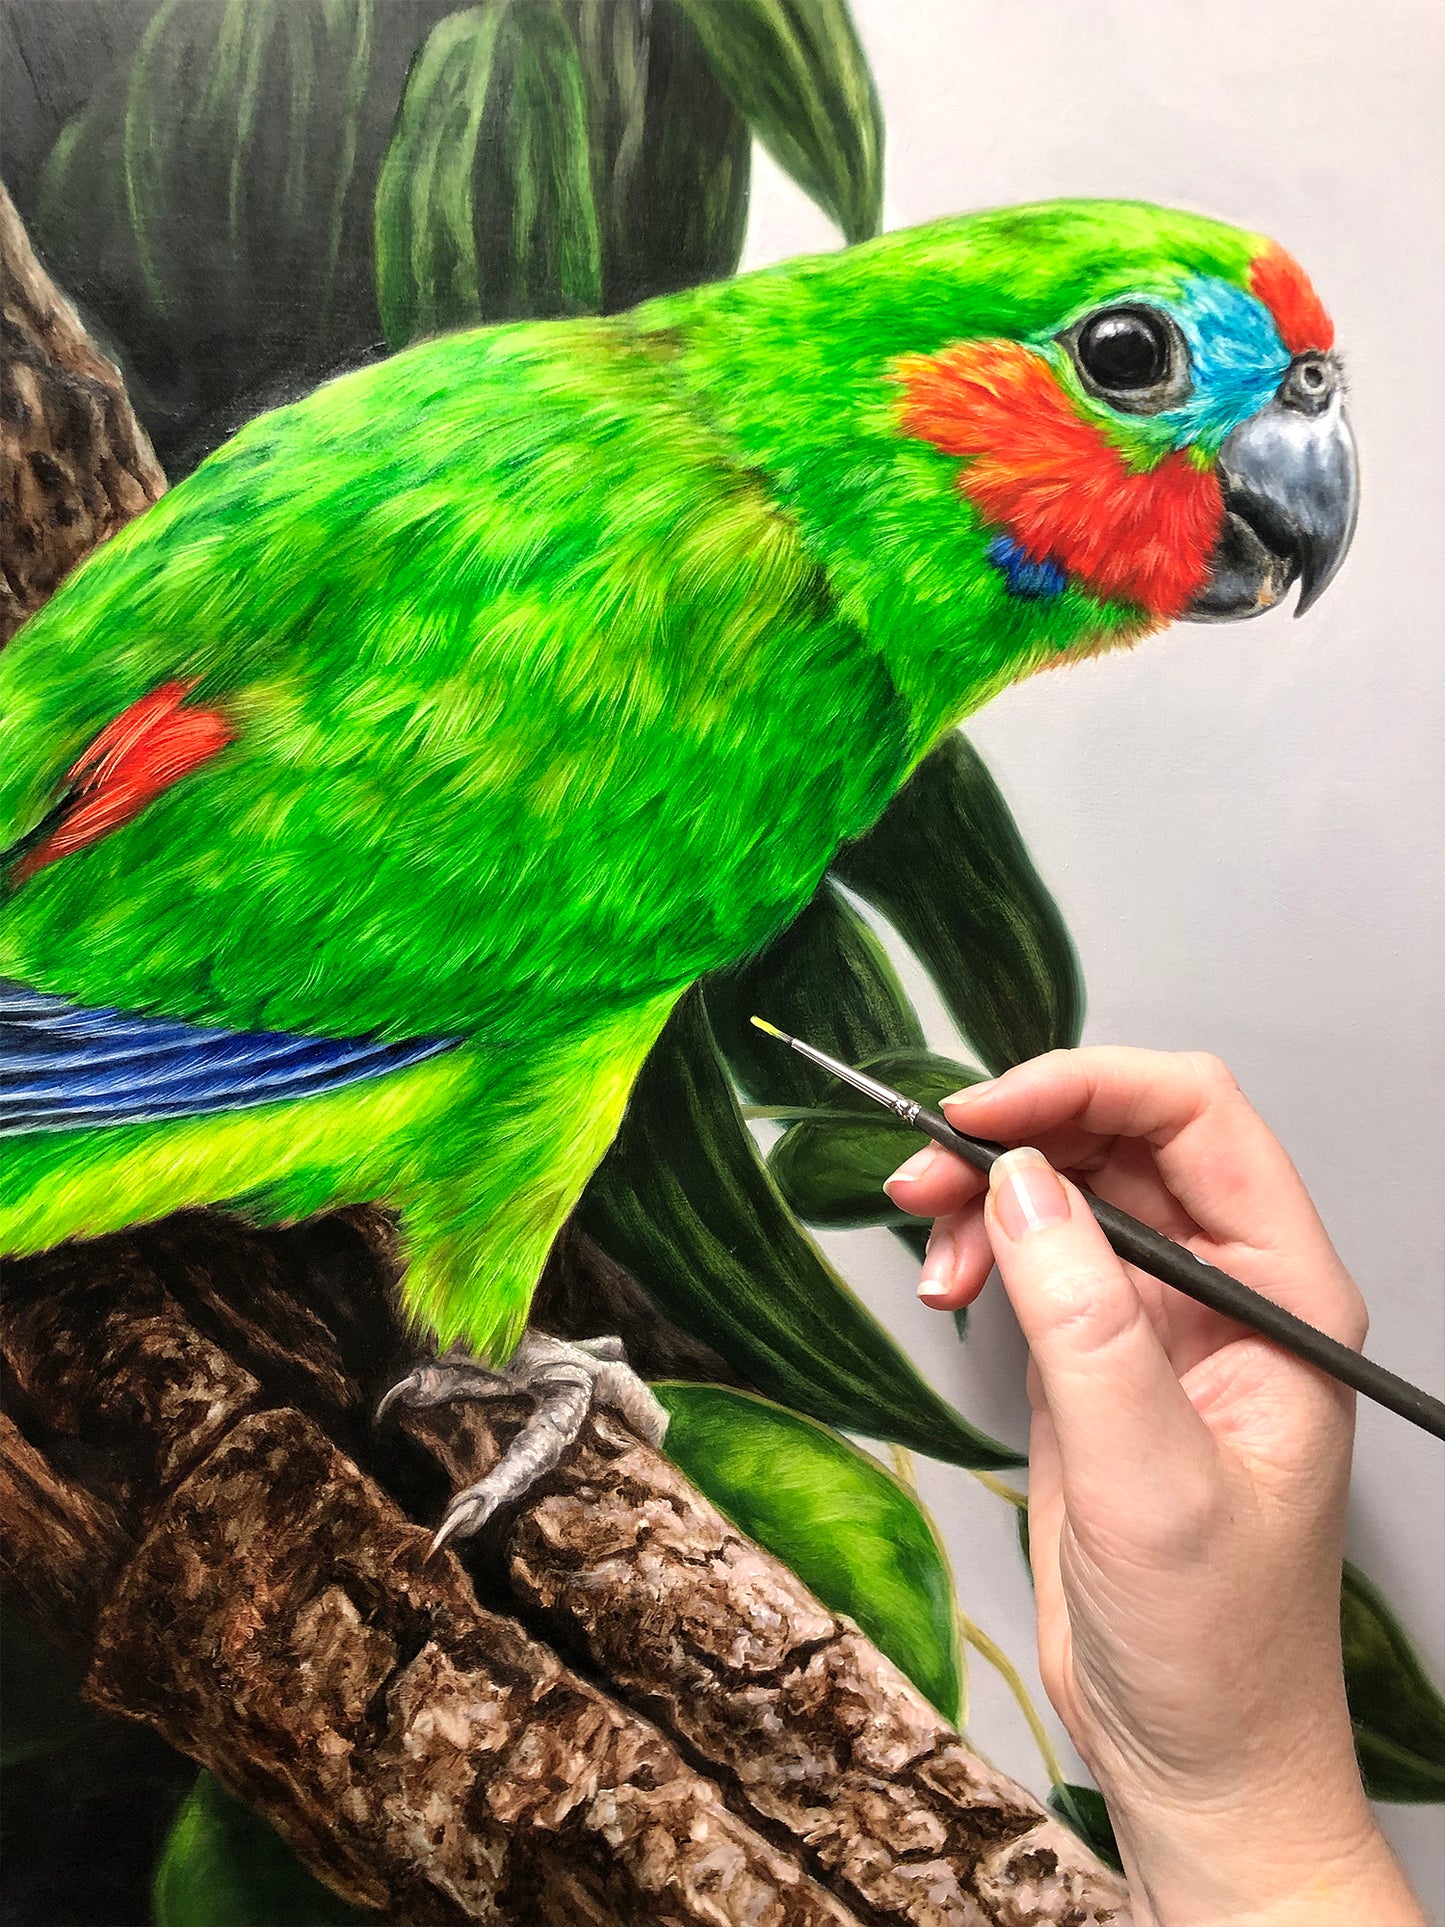 Double-eyed Fig Parrot - 25 x 25"